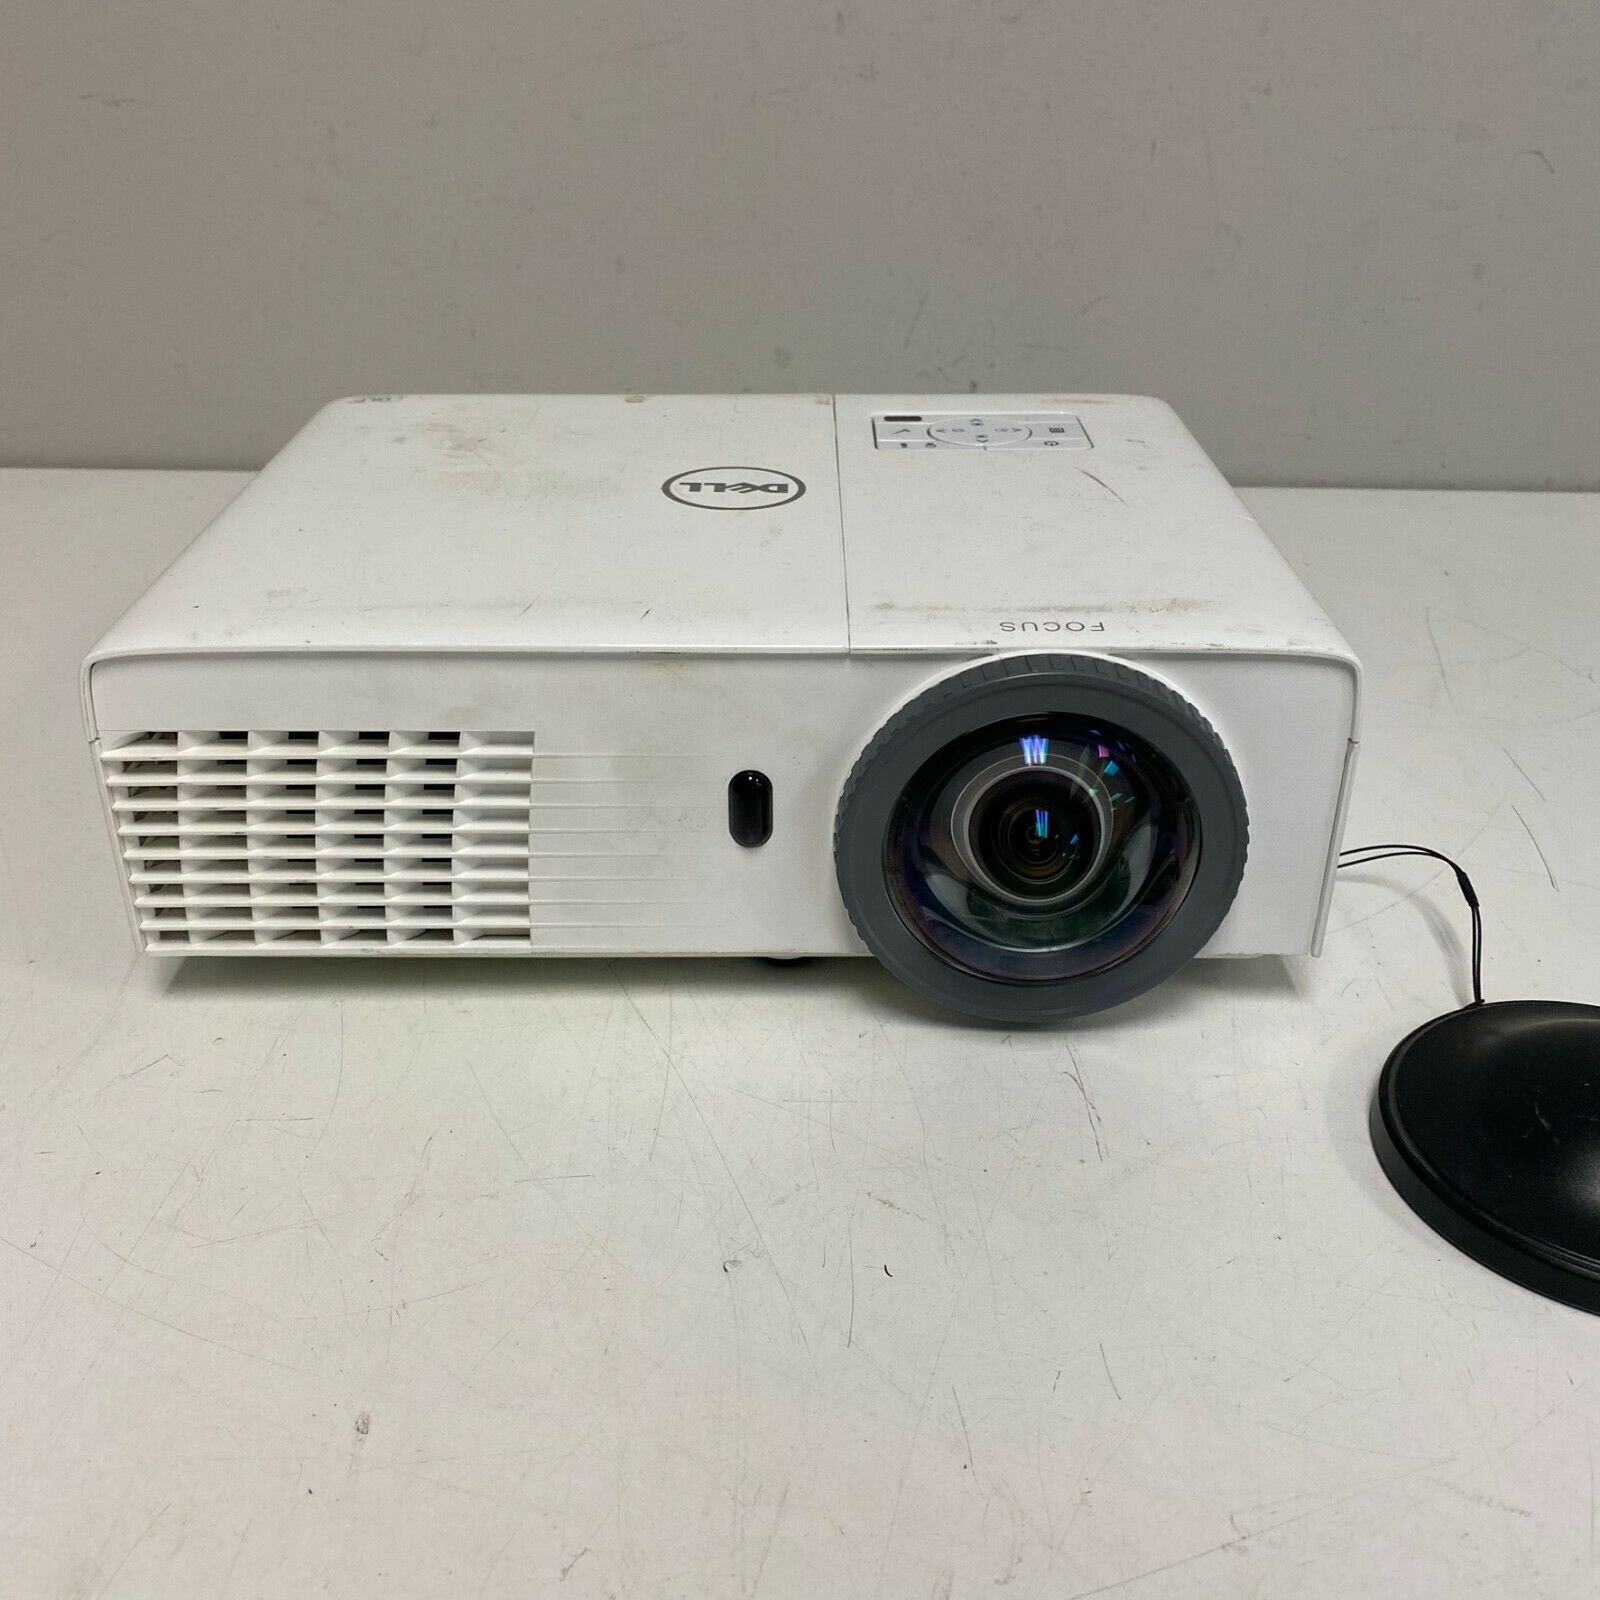 Used Oem Dell S320wi 1920x1080 Full Hd Display White Projector 932 Lamp Hours